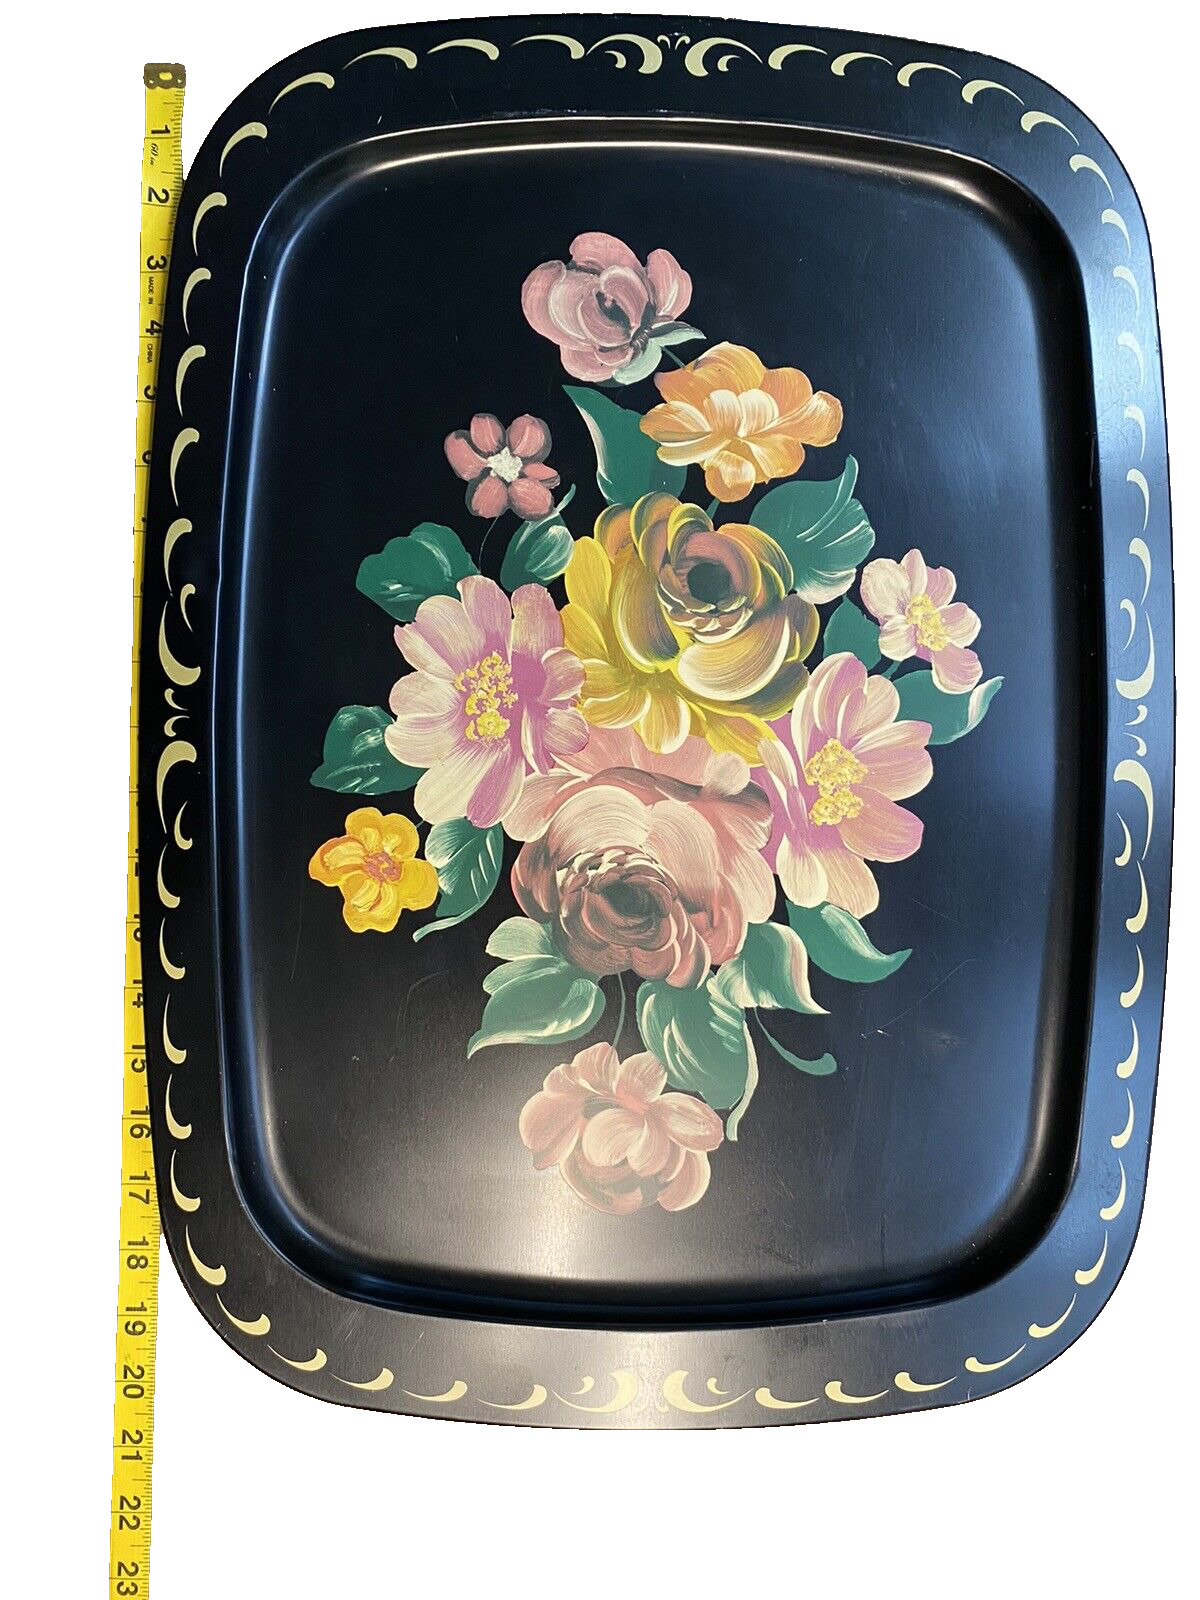 Toleware Tray Black Metal Hand Painted Floral 20x 15 Cottagecore VTG 50% off